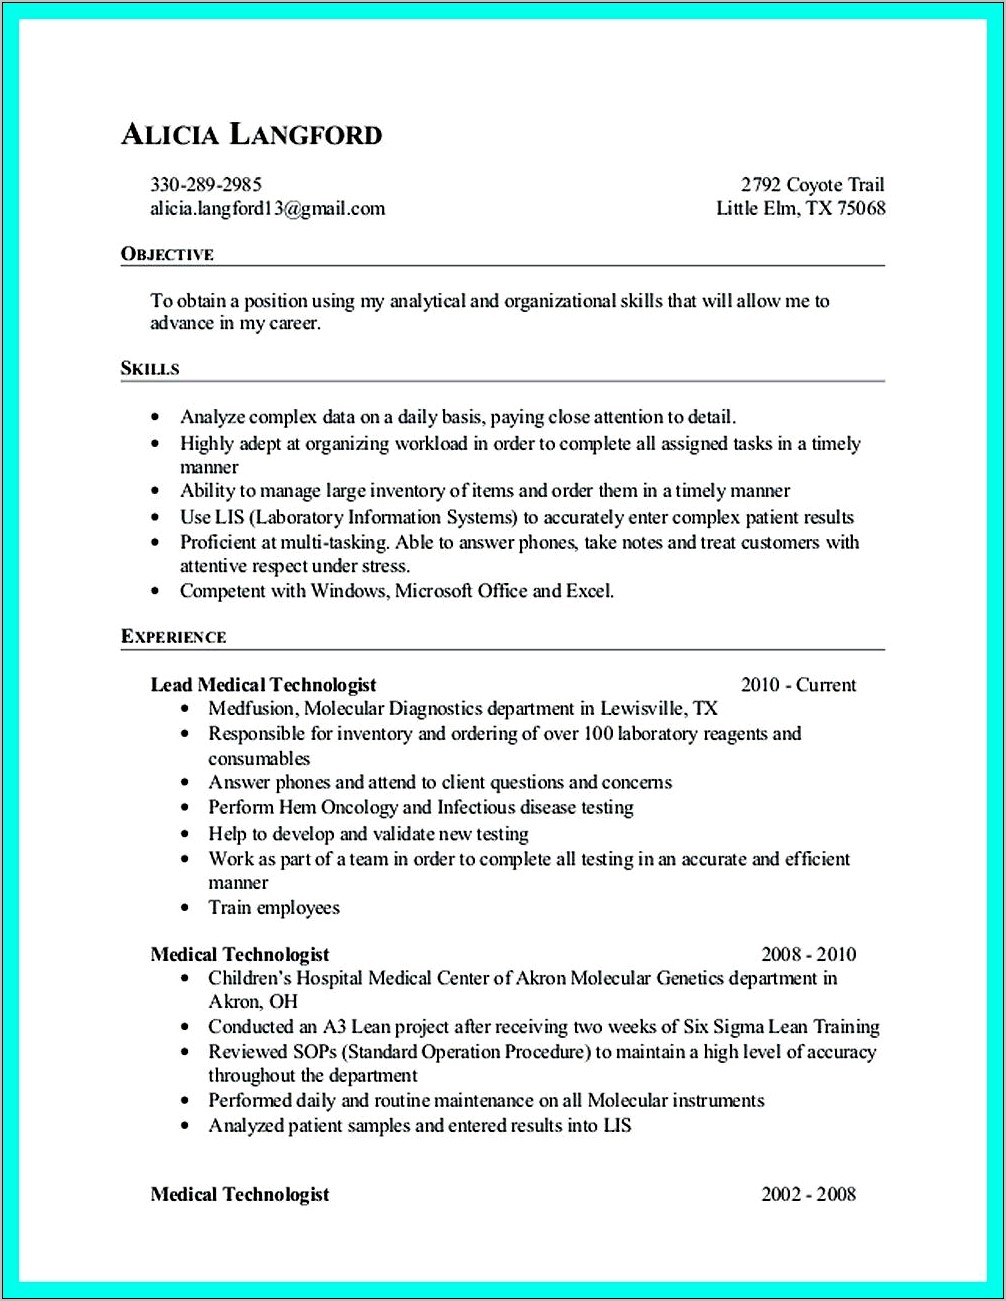 Describe Yourself Resume About Yourself Examples